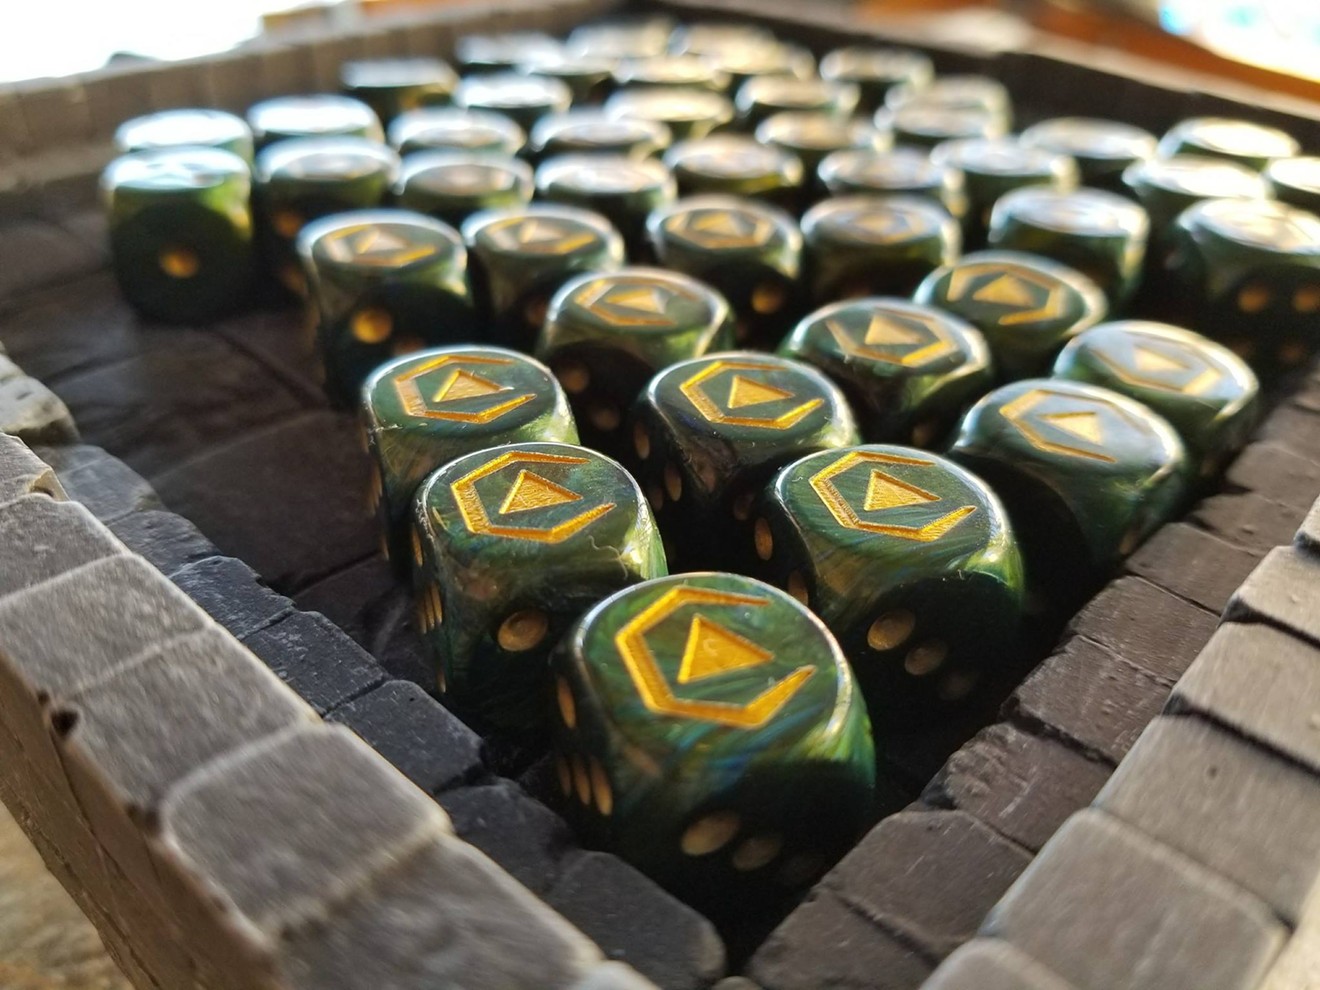 The con's official dice.